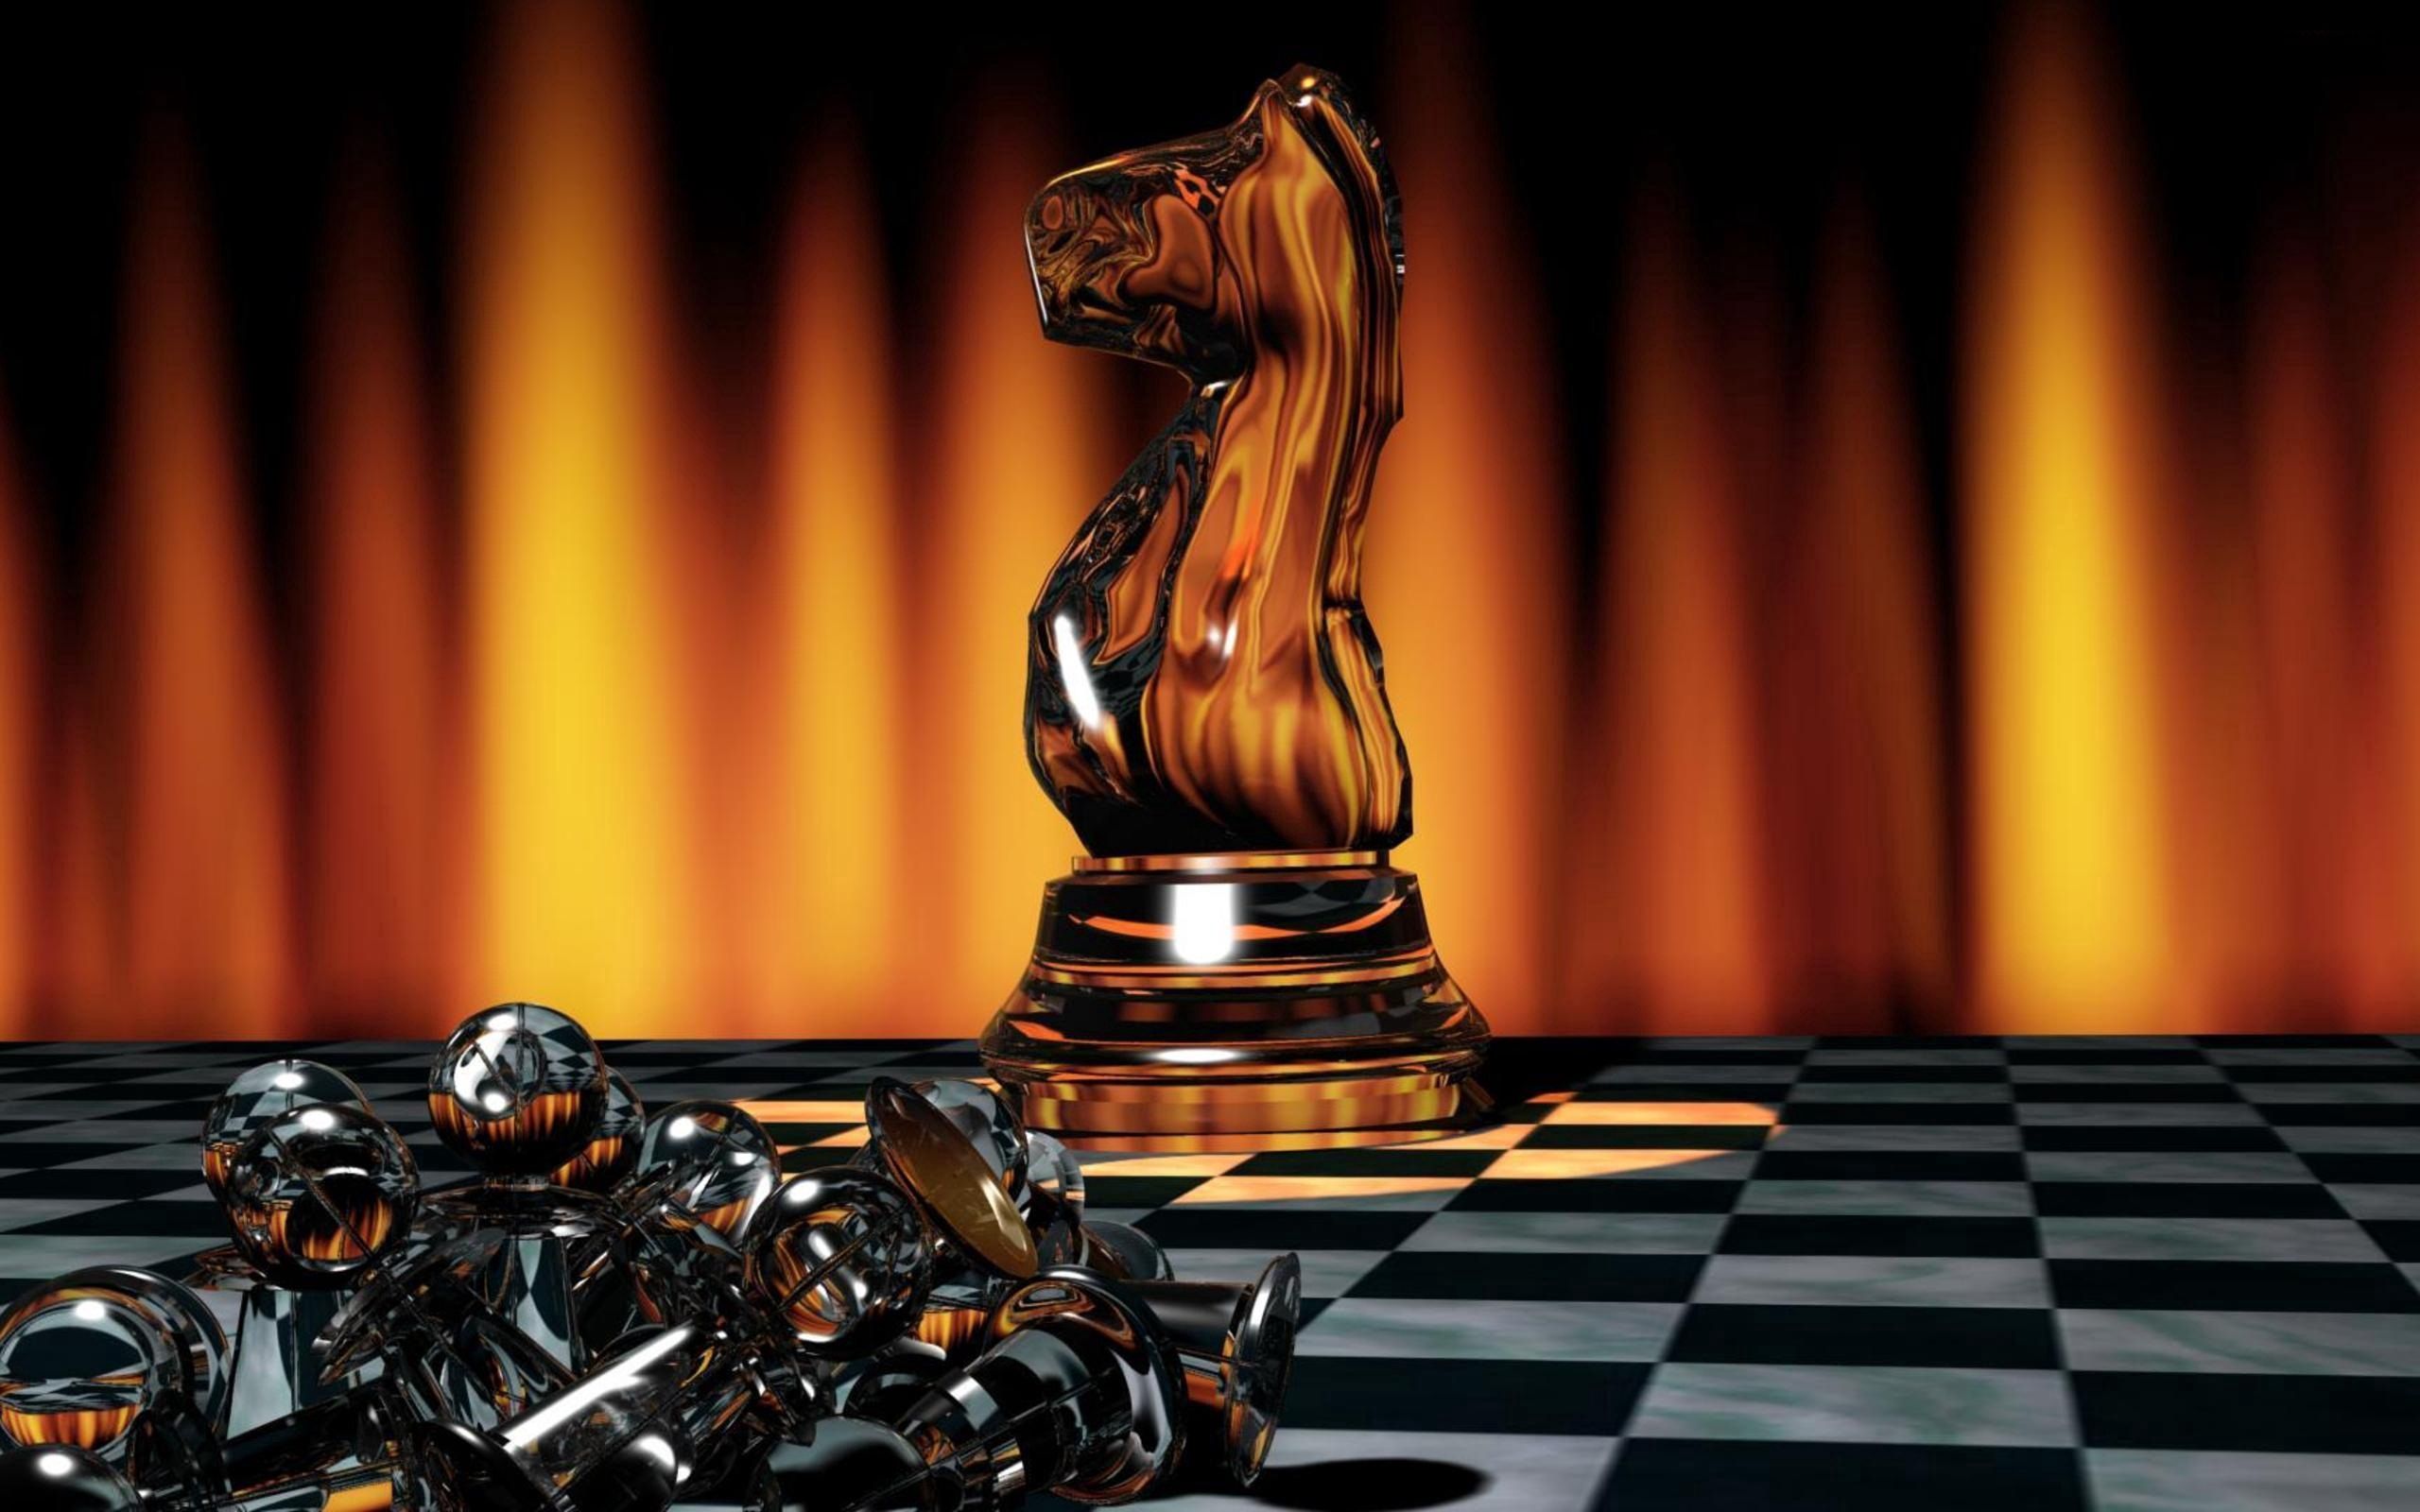 chess, 3d, game, chessmen, chess pieces, shine, light, board cellphone